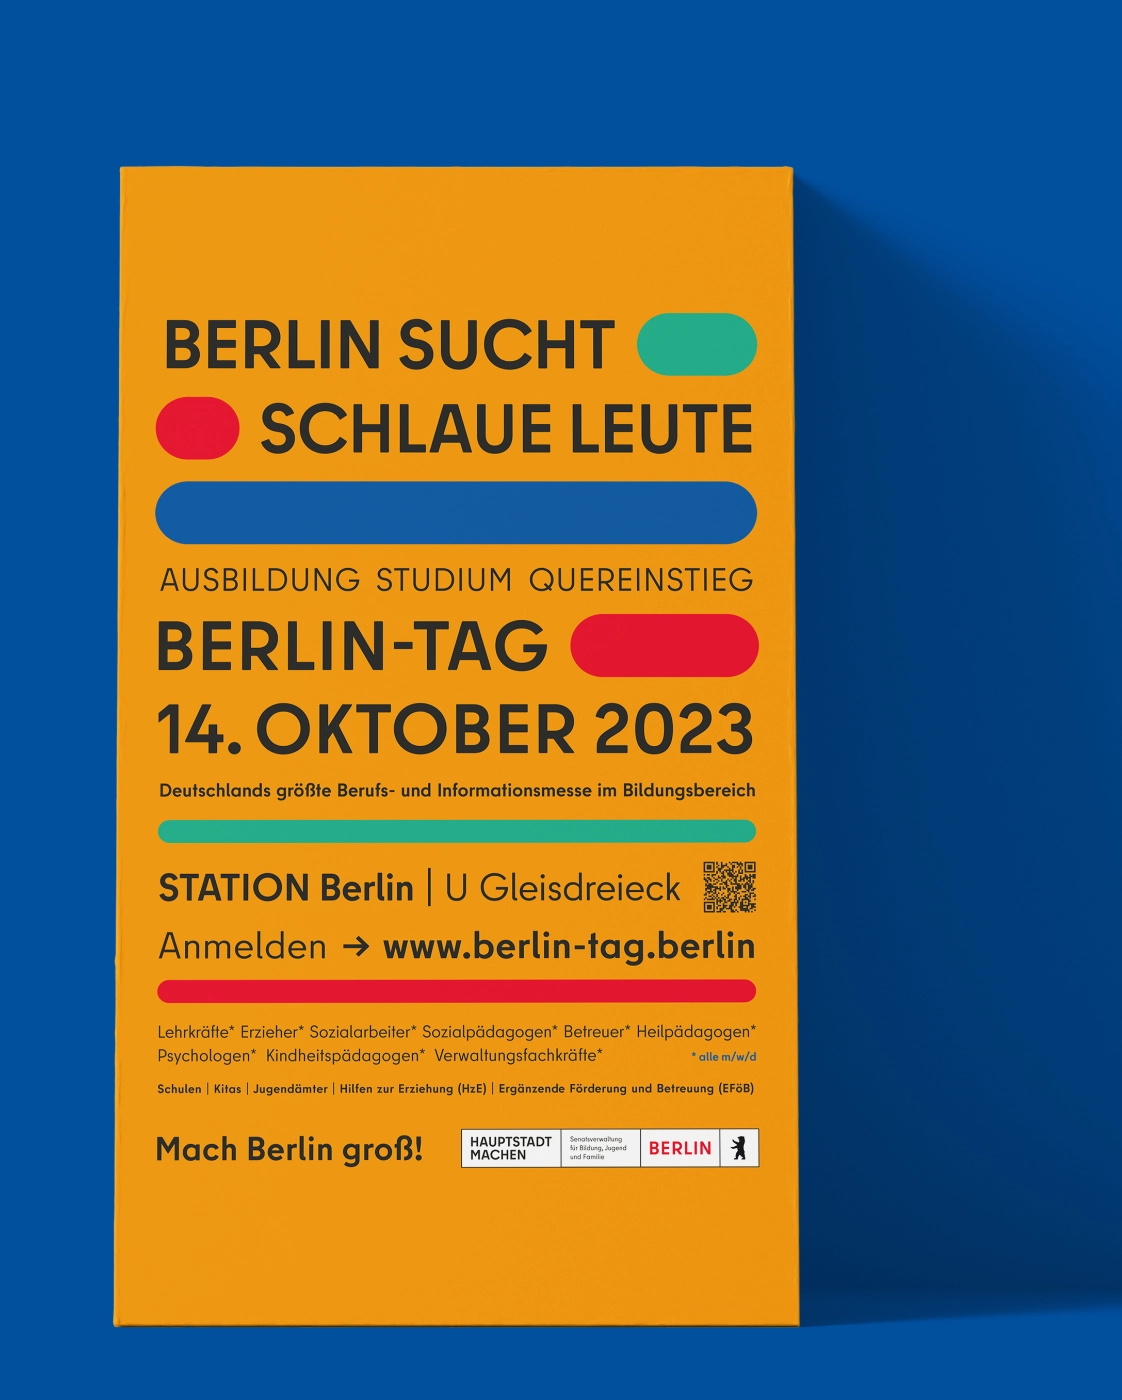 One picture shows a mockup poster for Berlin Tag. Berlin Day is Germany's largest careers and information fair in the education sector